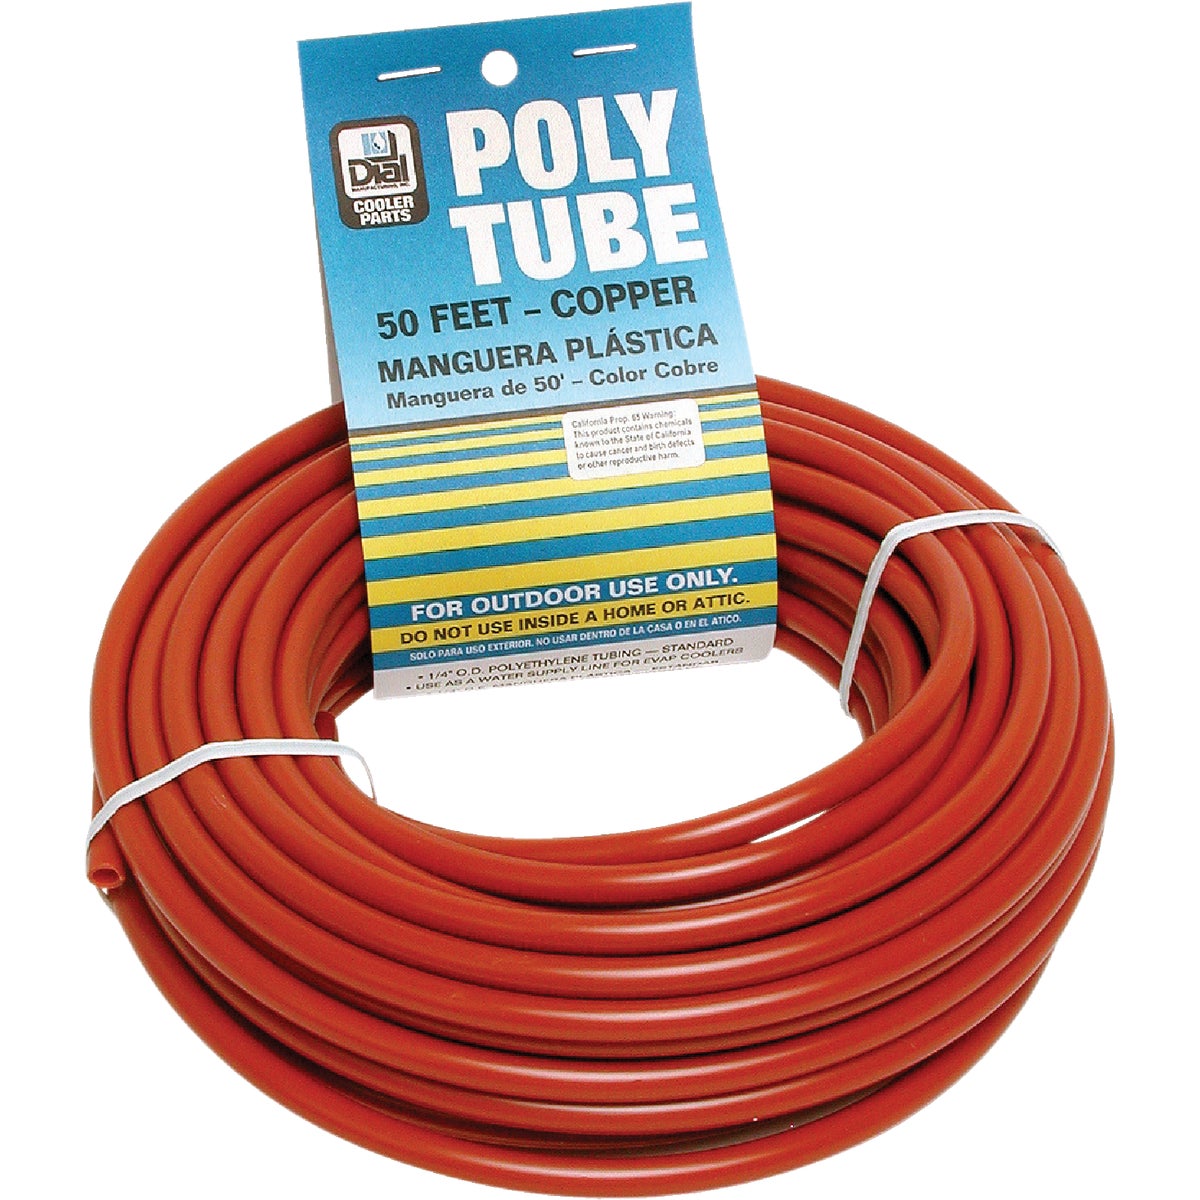 Dial Manufacturing 4299 Dial 1/4 In. OD x 50 Ft. L Copper Poly Tubing 4299